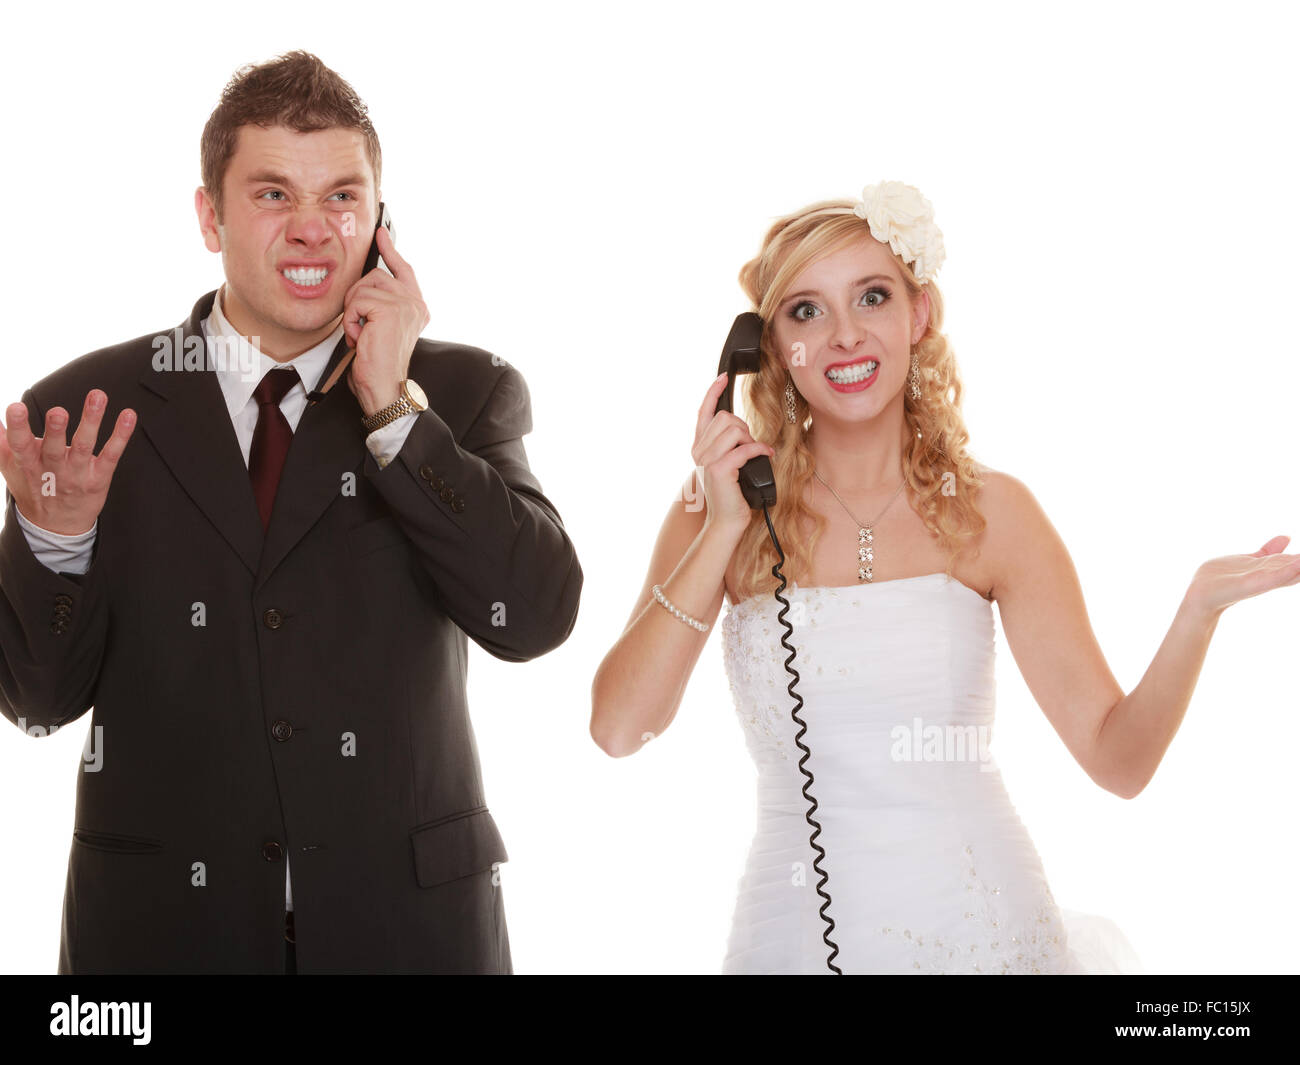 Wedding couple relationship difficulties. Stock Photo